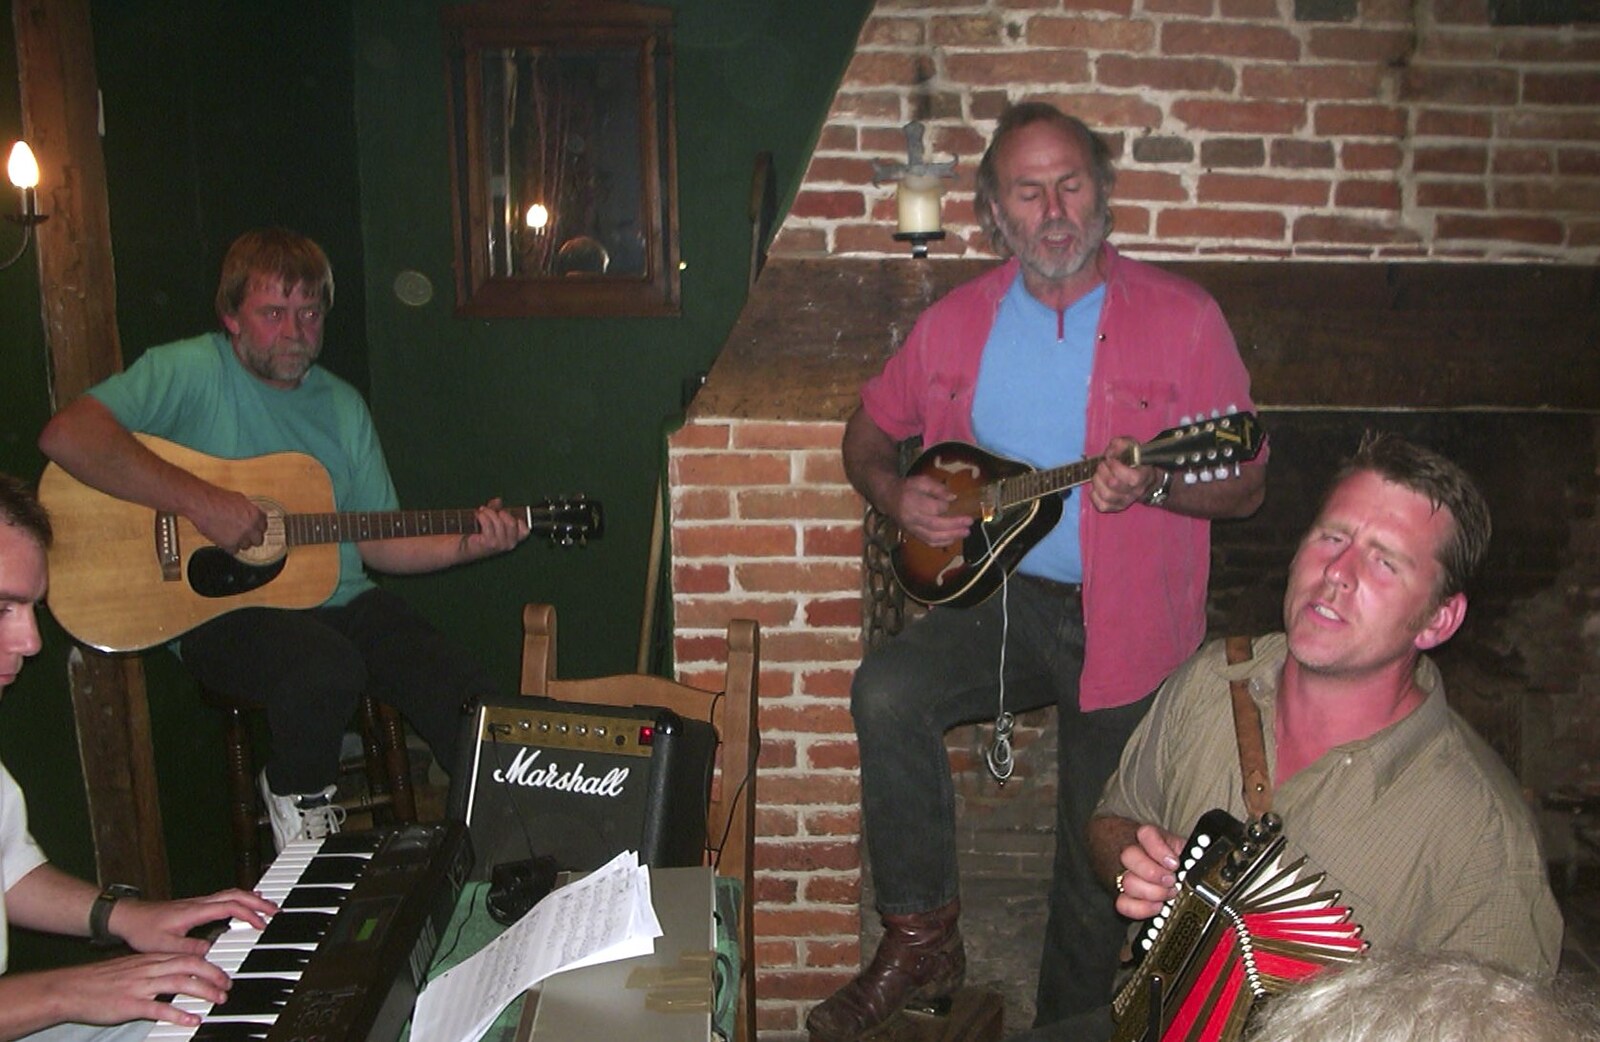 Guitar, mandolin and squeezebox from The BSCC at Laxfield and Hoxne, Suffolk - 2nd May 2002